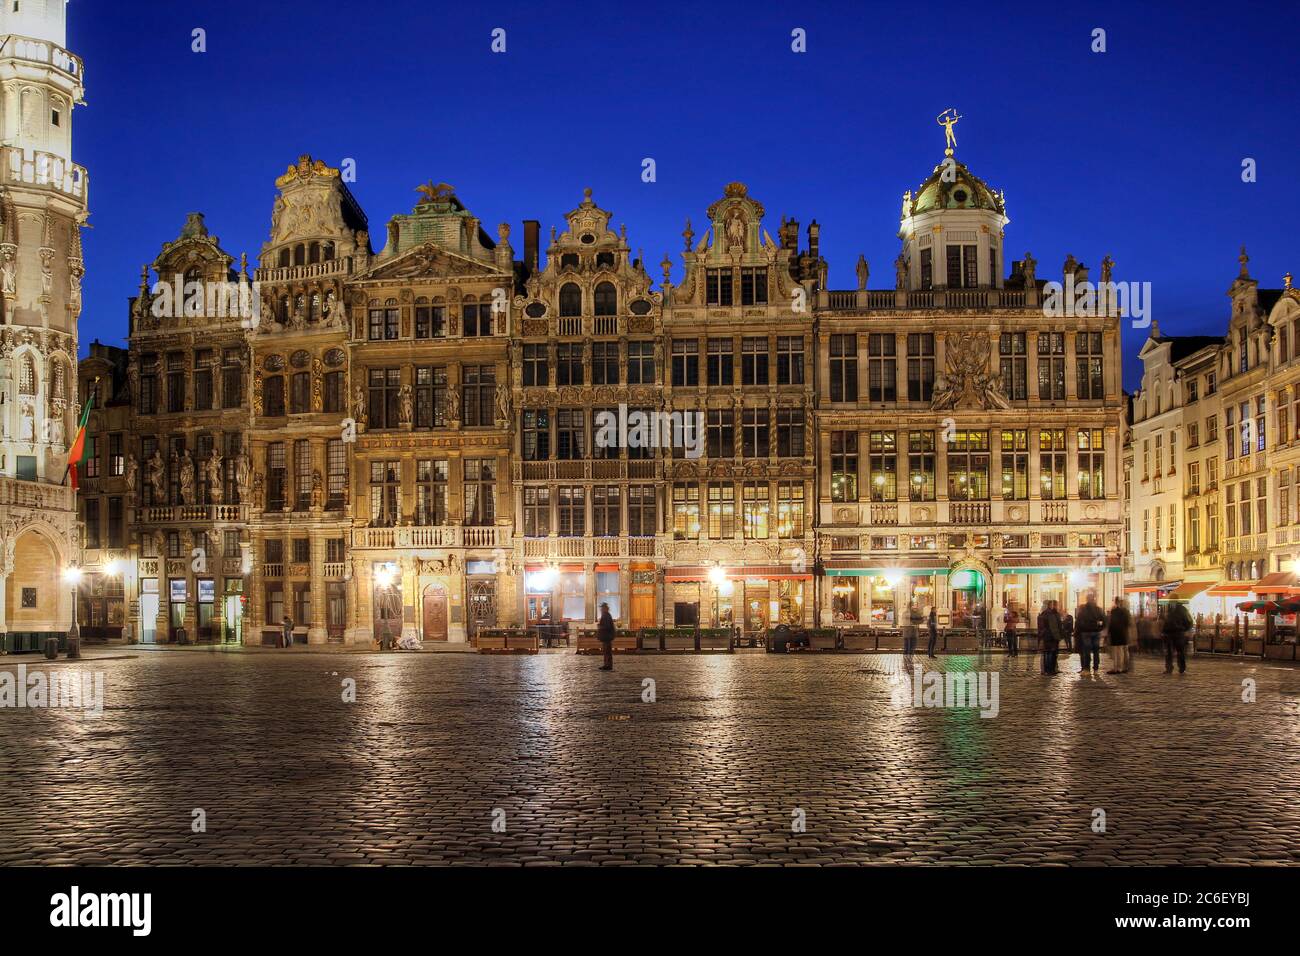 Elaborate row of baroque houses facing the Grand Place in Brussels, Belgium at night. Stock Photo